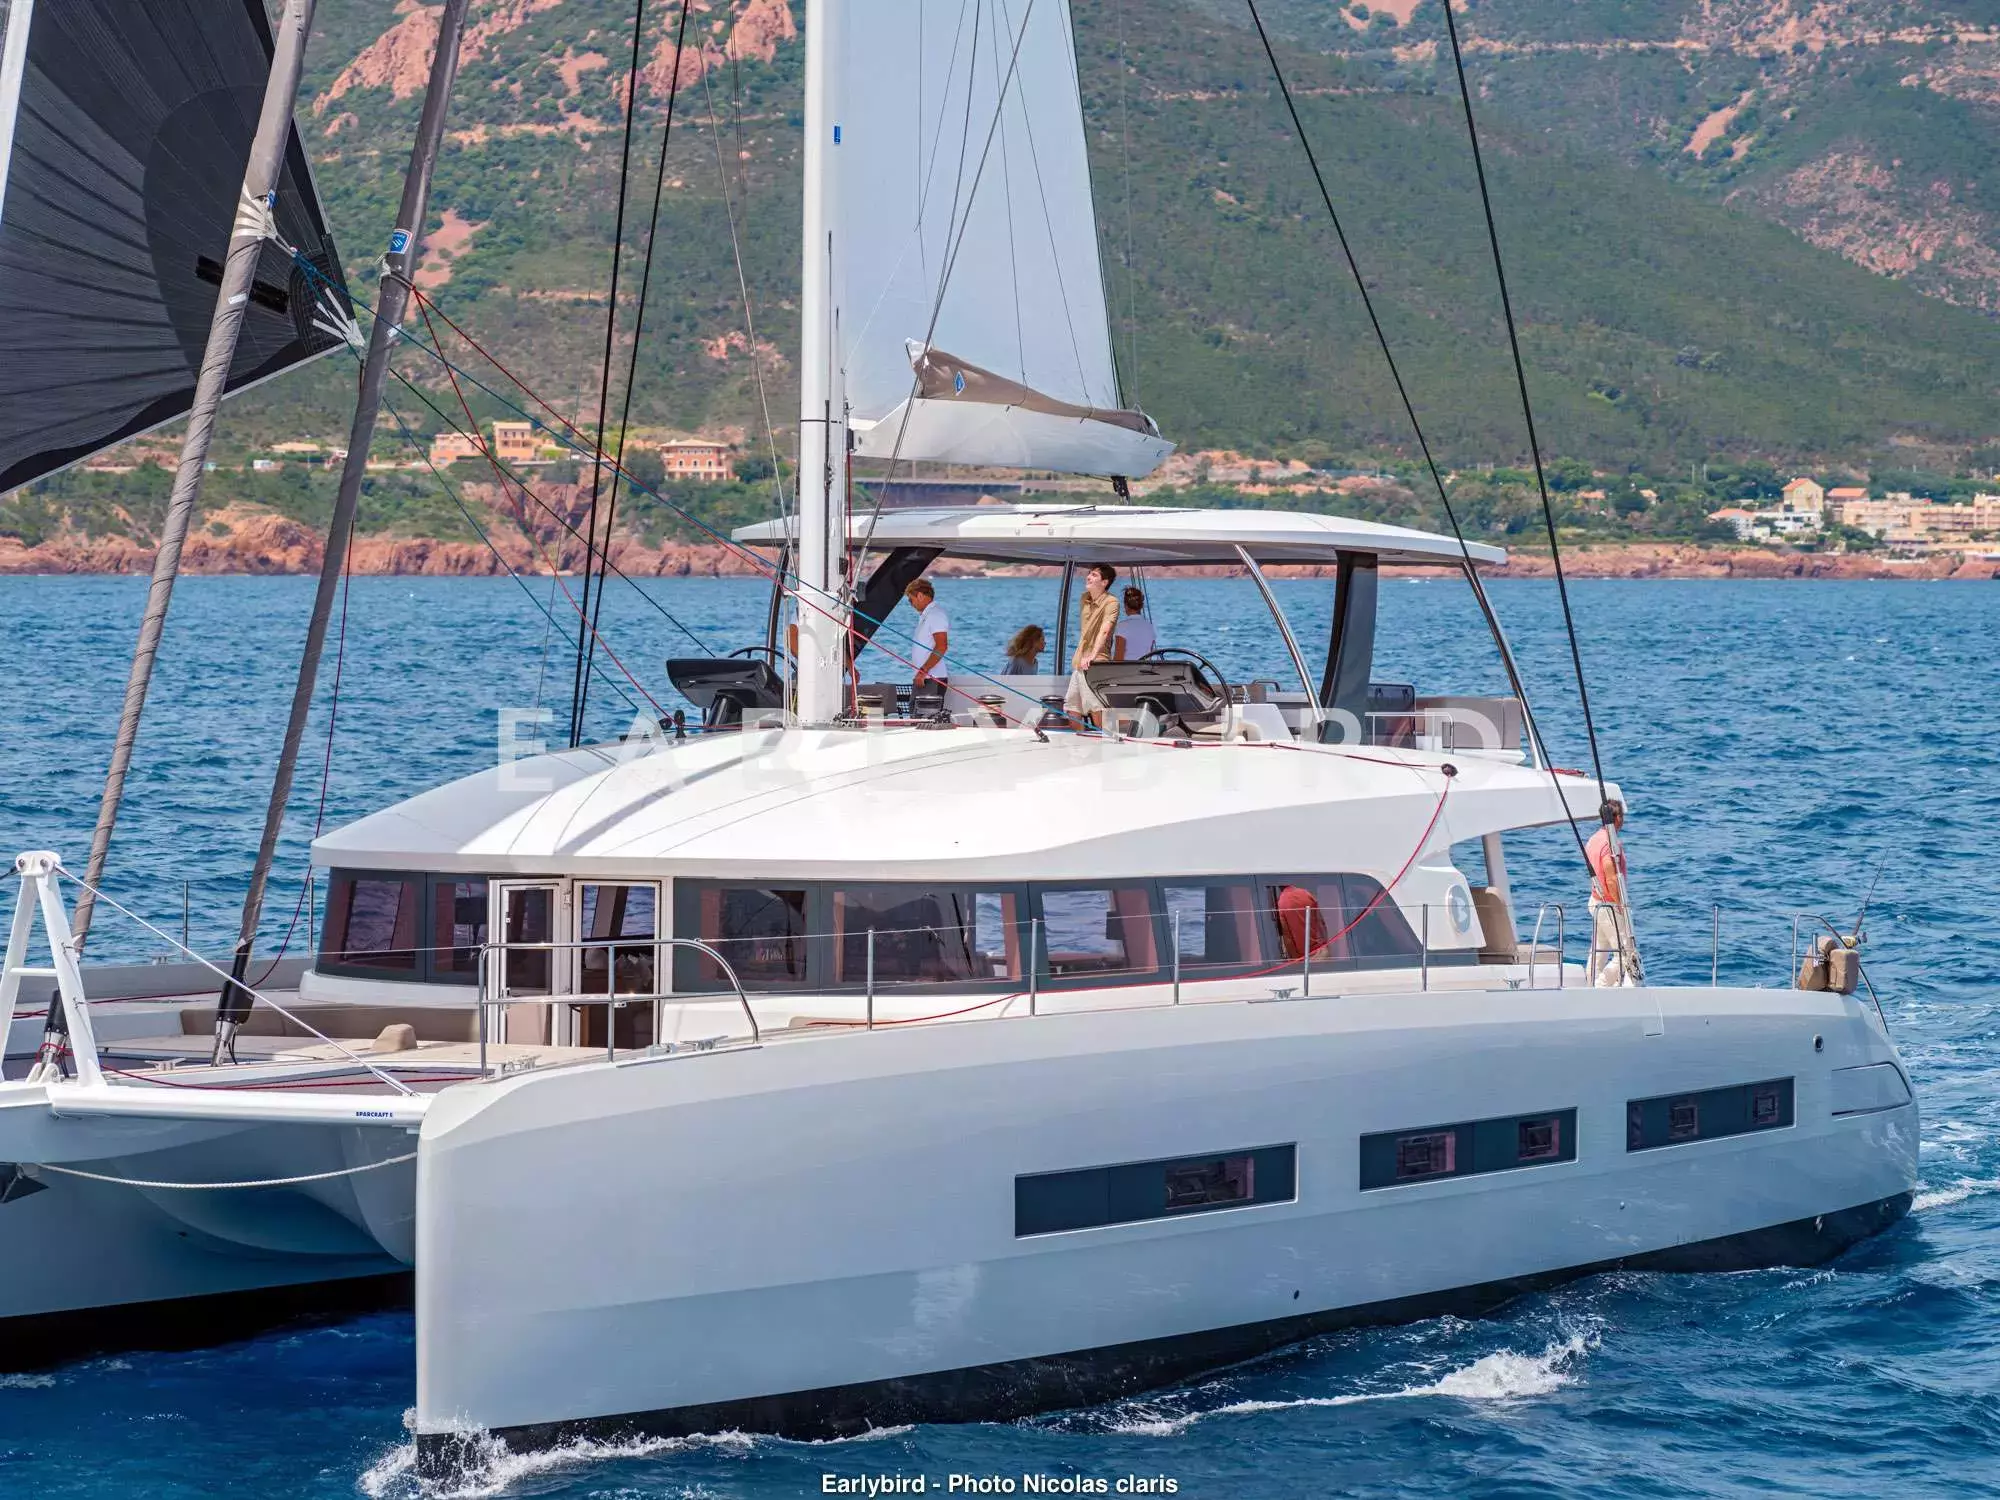 Earlybird by Lagoon - Top rates for a Charter of a private Luxury Catamaran in Martinique